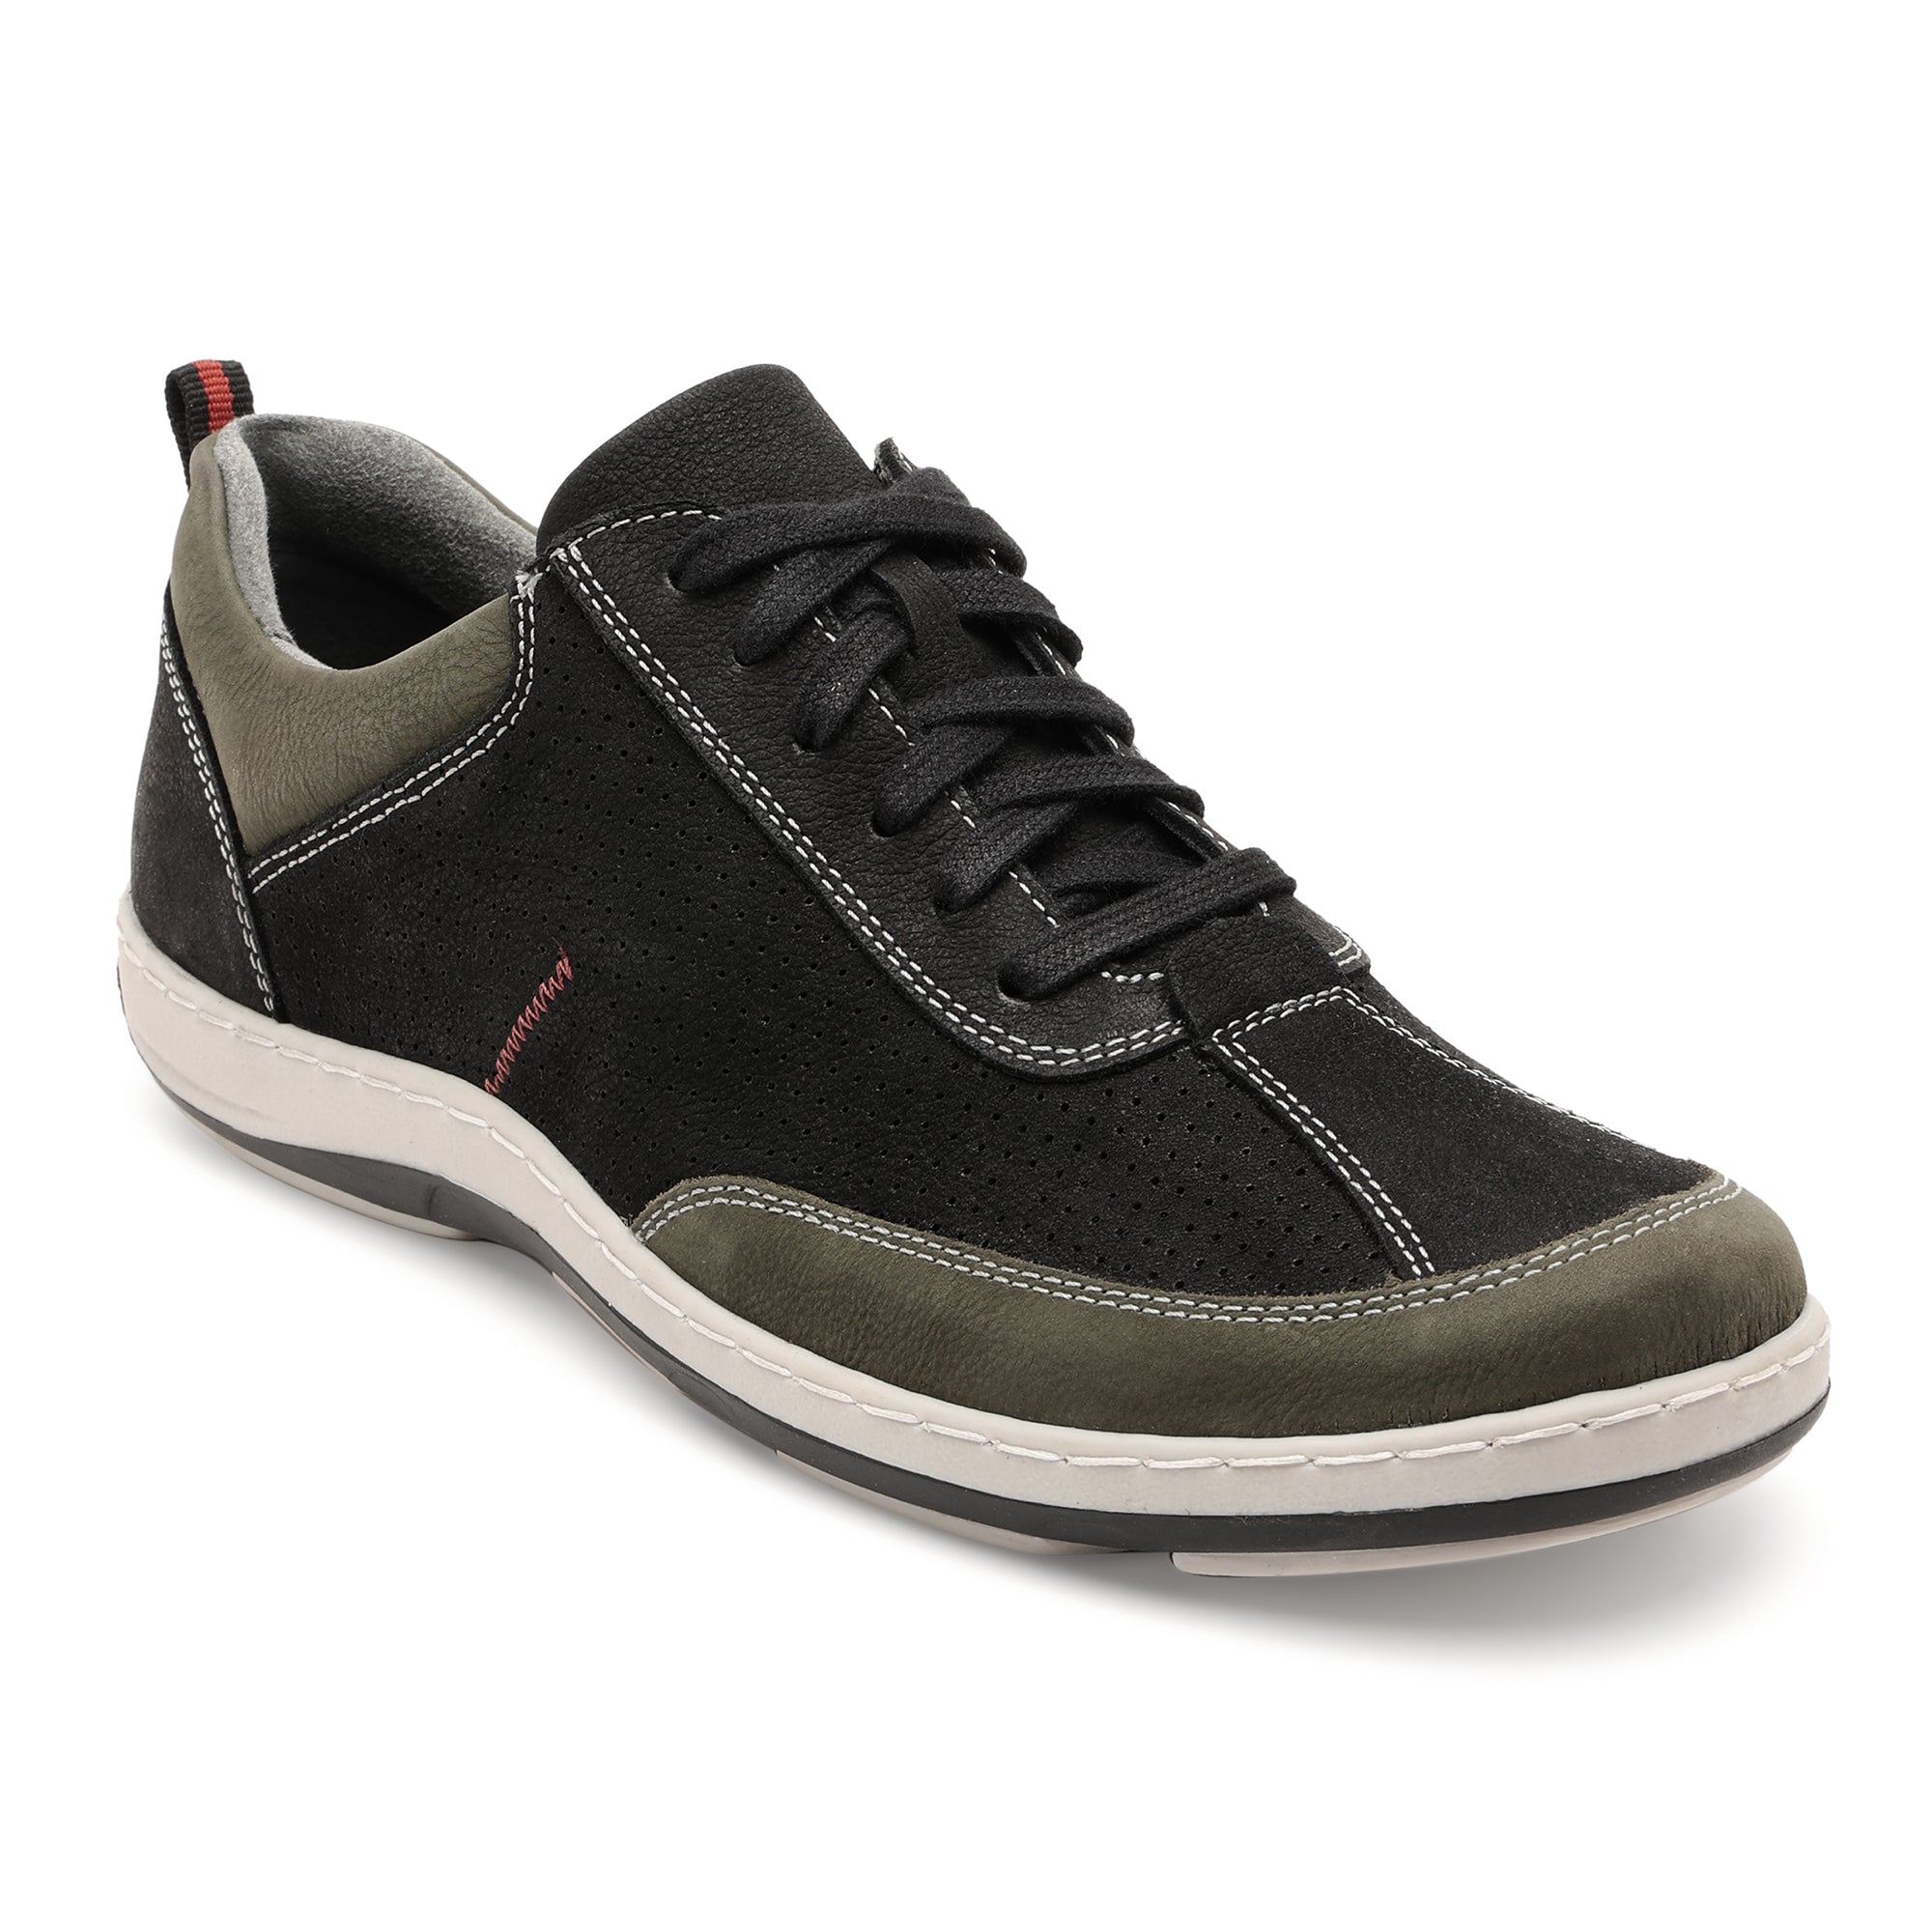 Quentin 08 Men Black and Khaki Casual Shoes